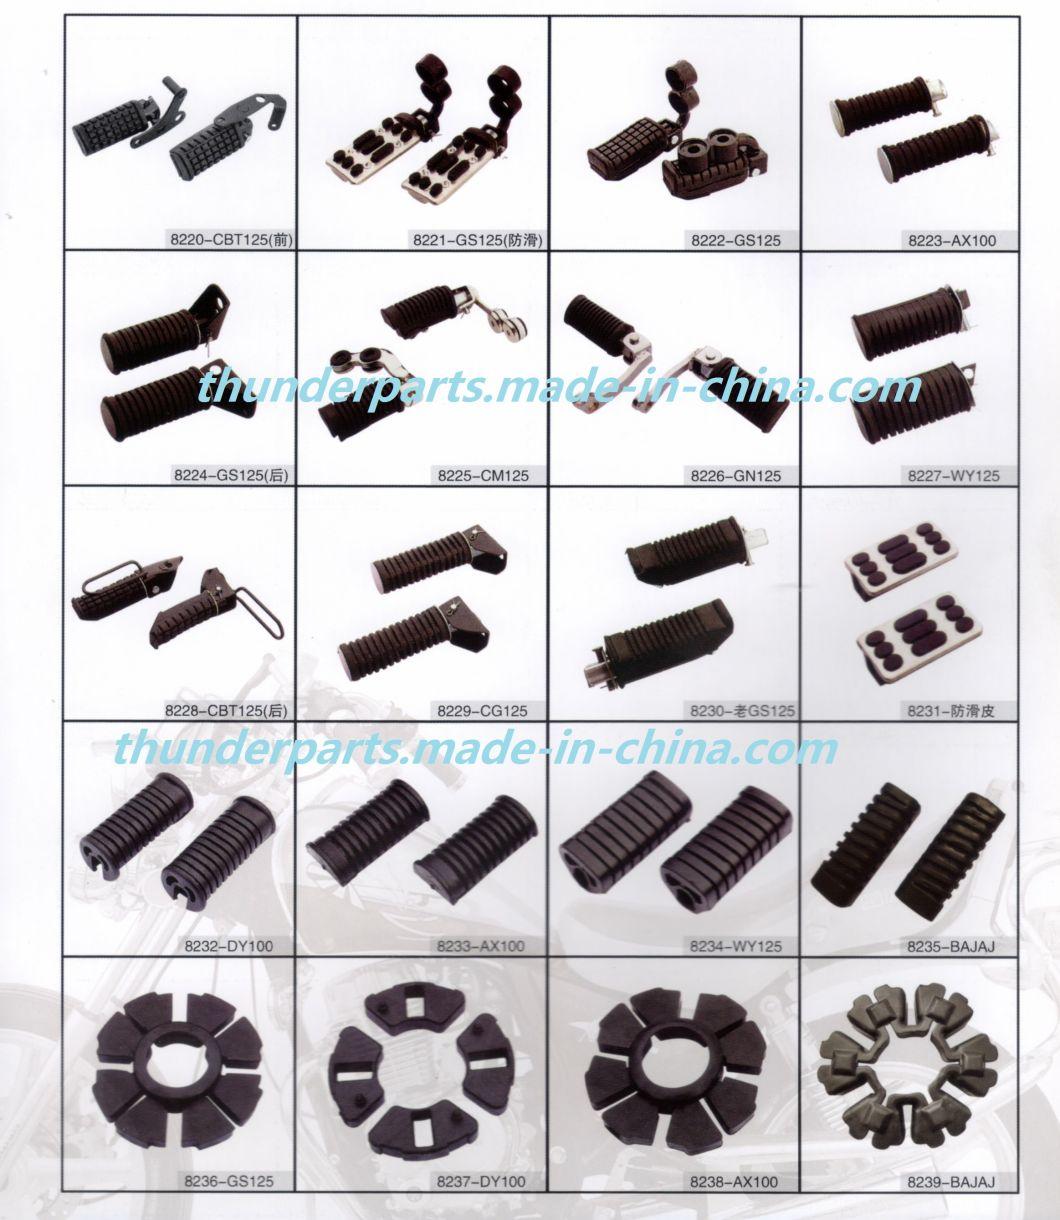 Motorcycle Rubber Parts Factory in Guangzhou